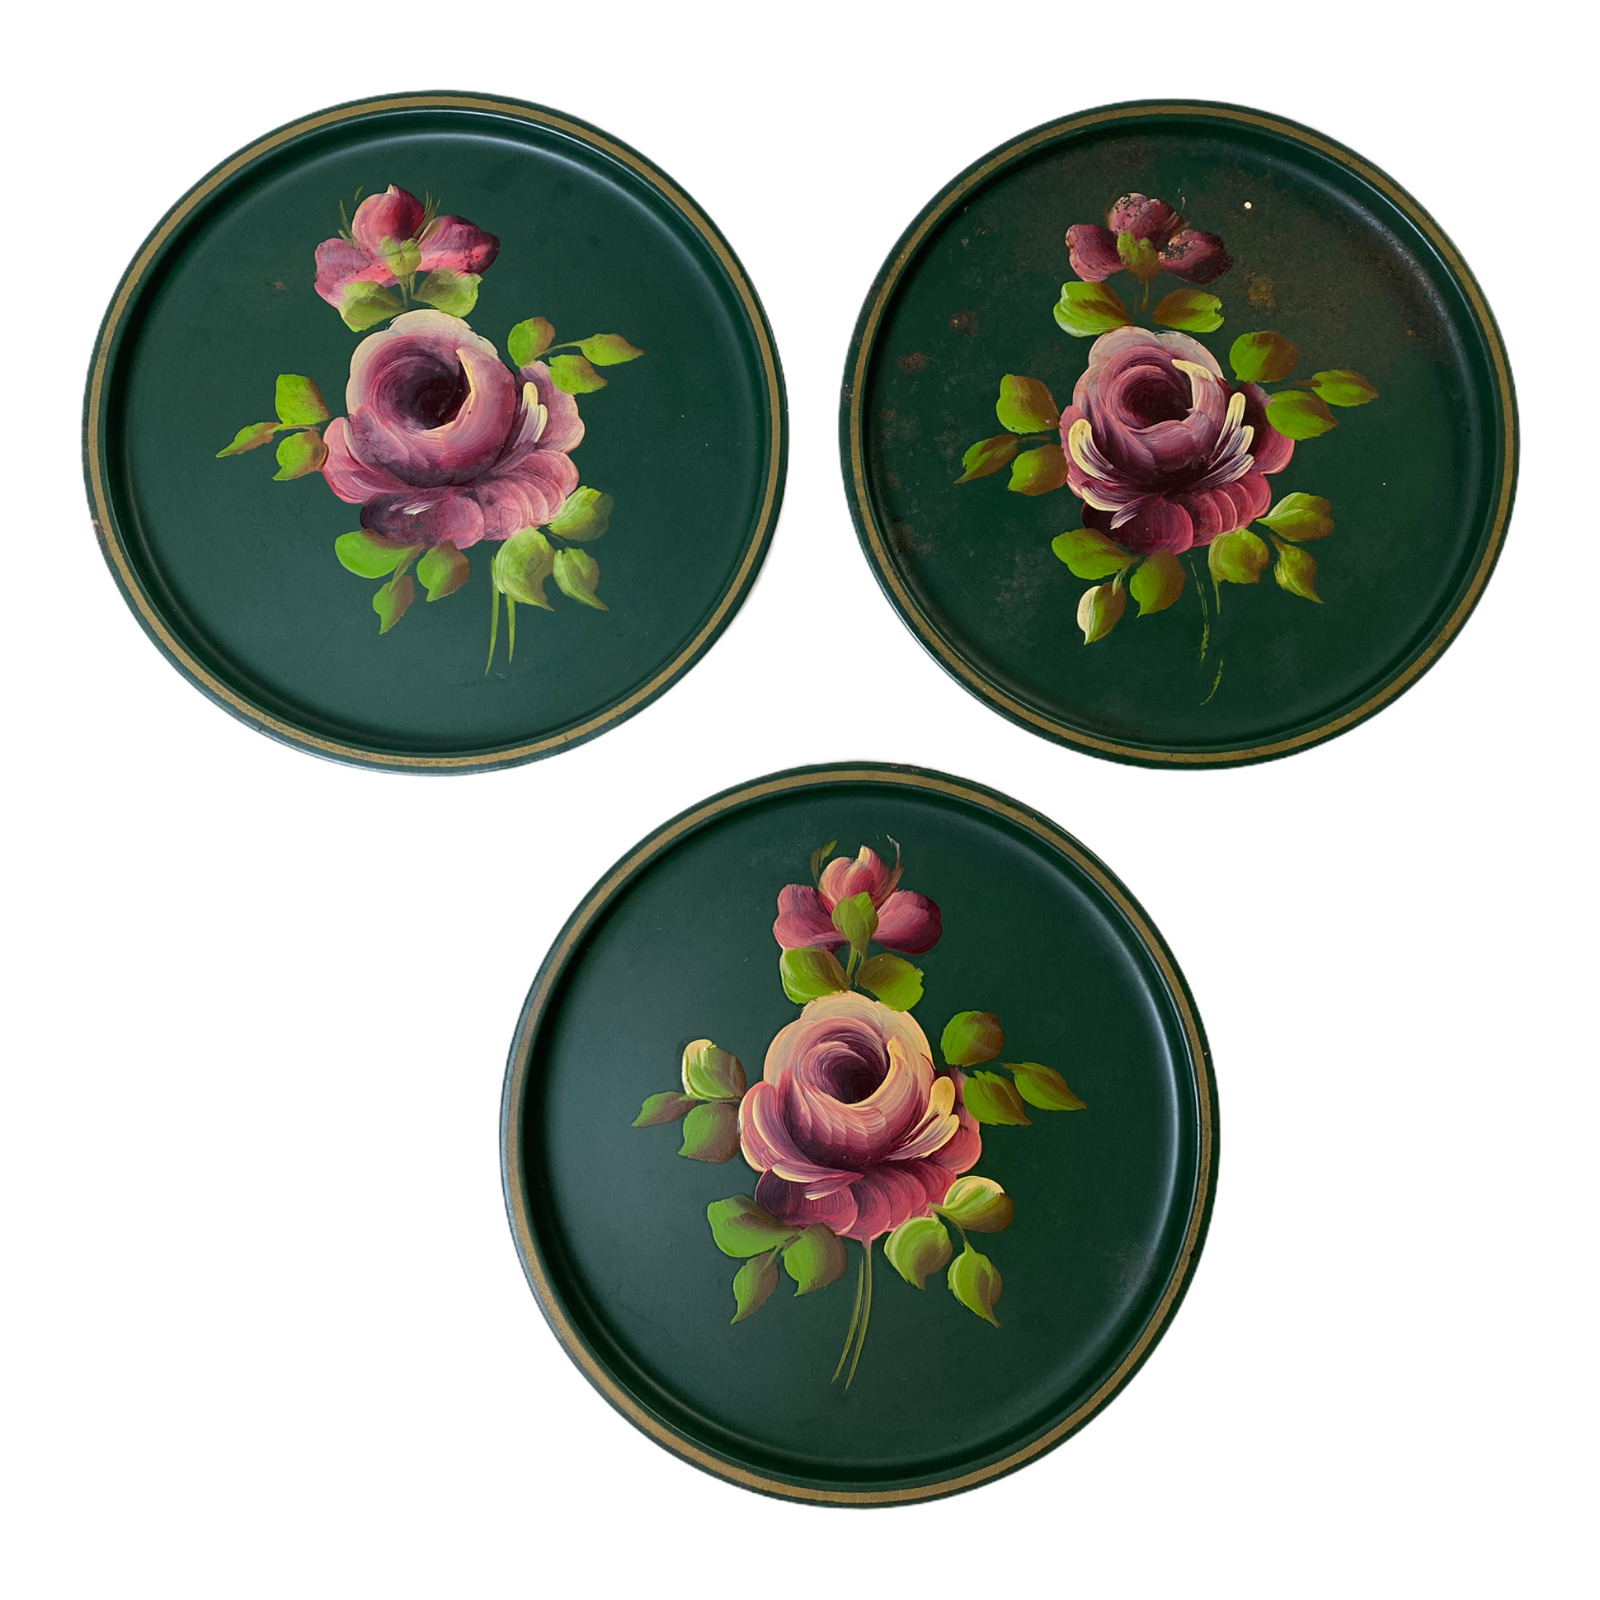 3X VTG Metal Tin Floral Toleware Serving Trays E.T. Nash Co Hand Painted Green